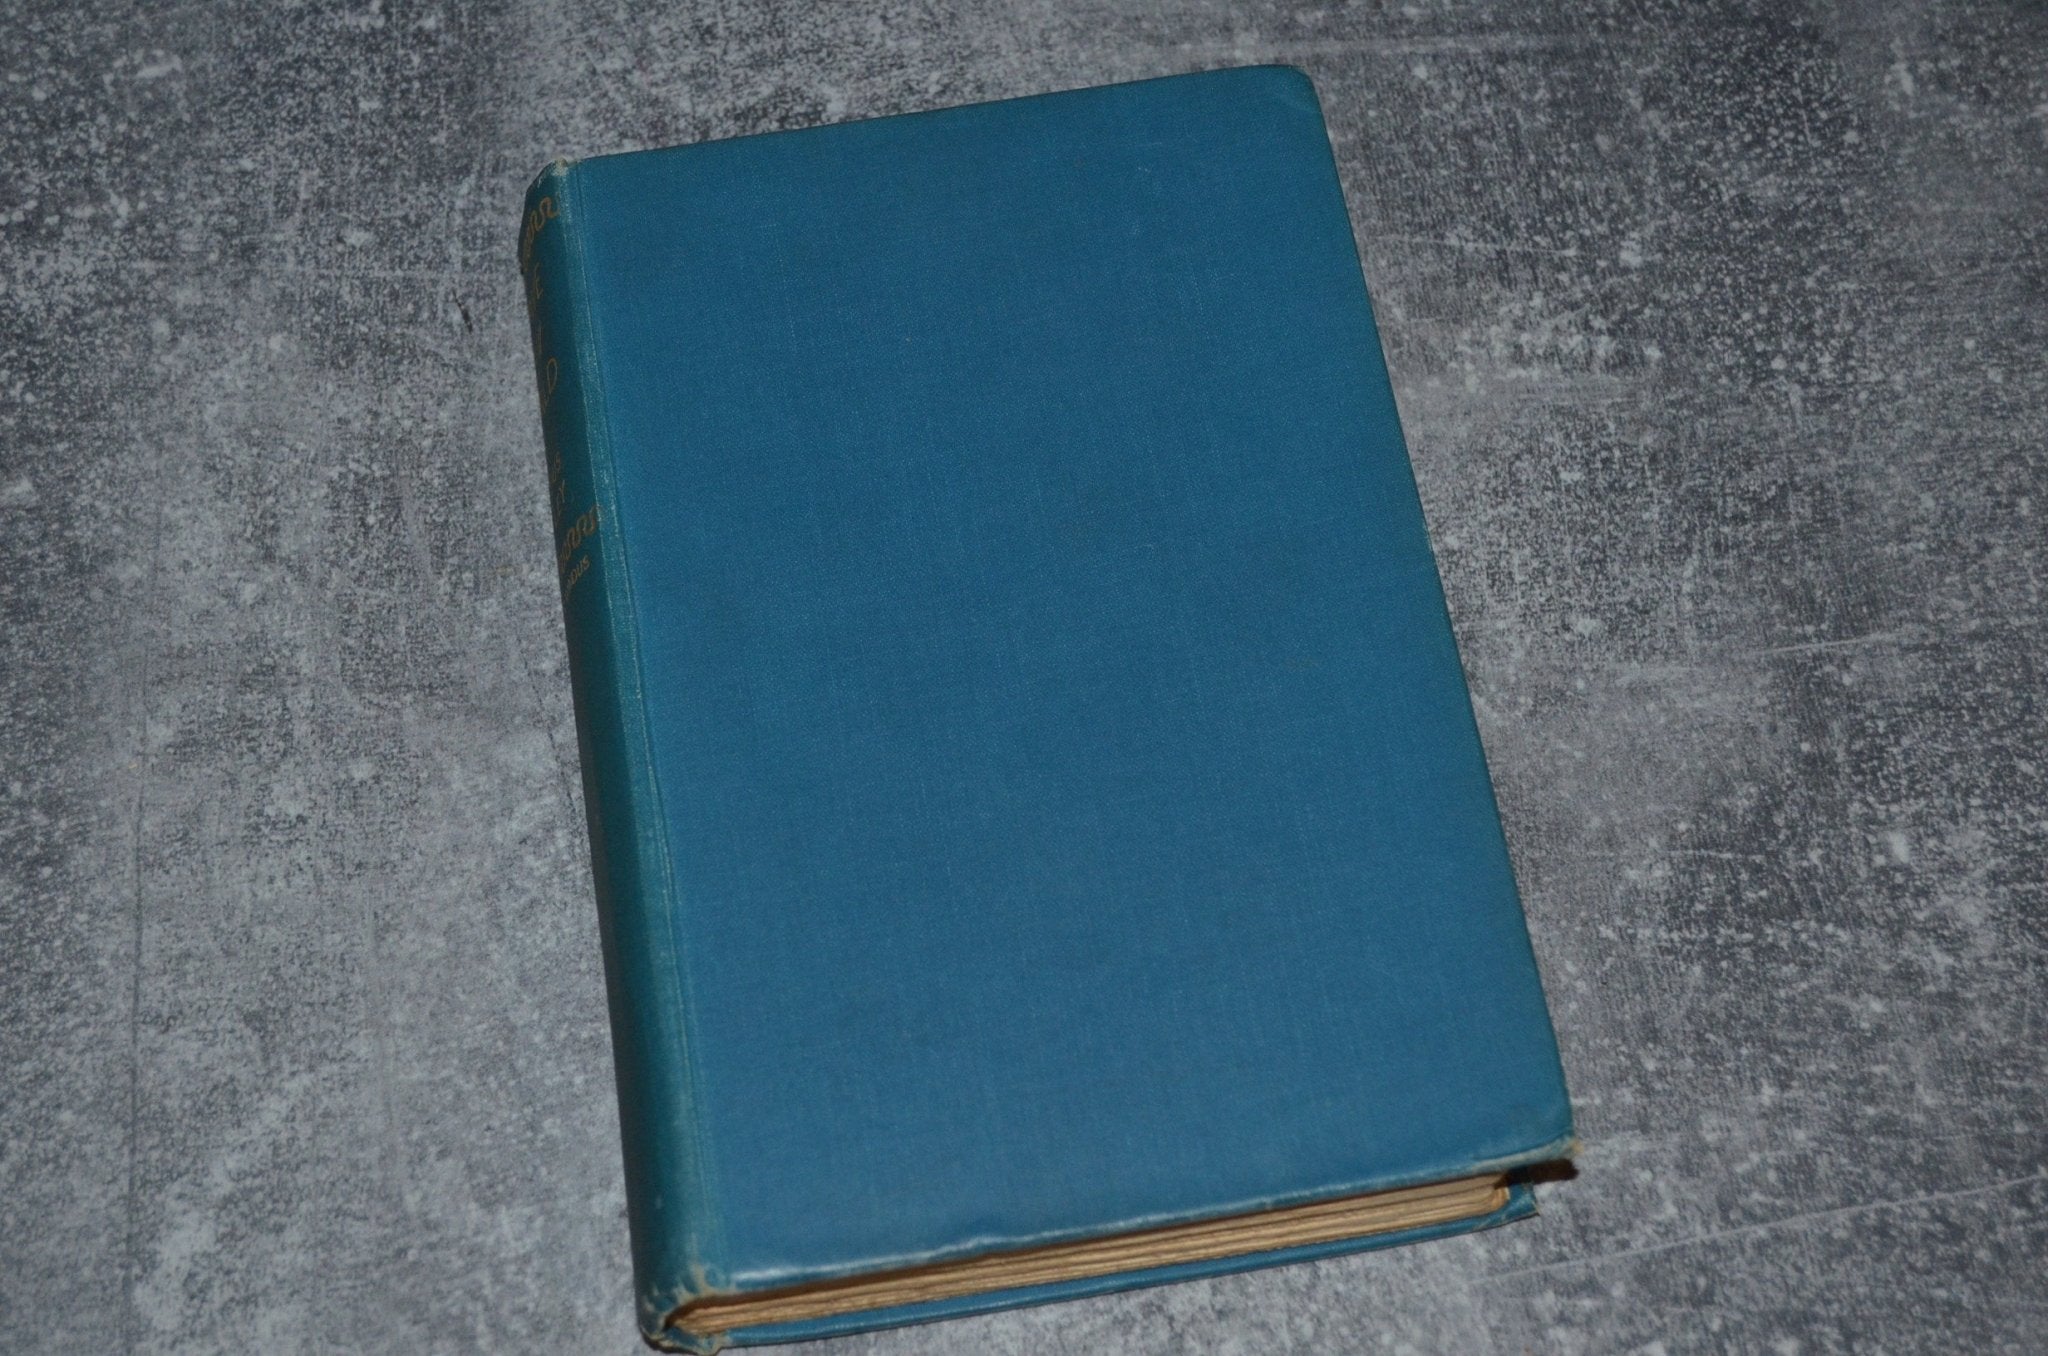 First Edition First Printing Brave New World by Aldous Huxley 1932 - Brookfield Books